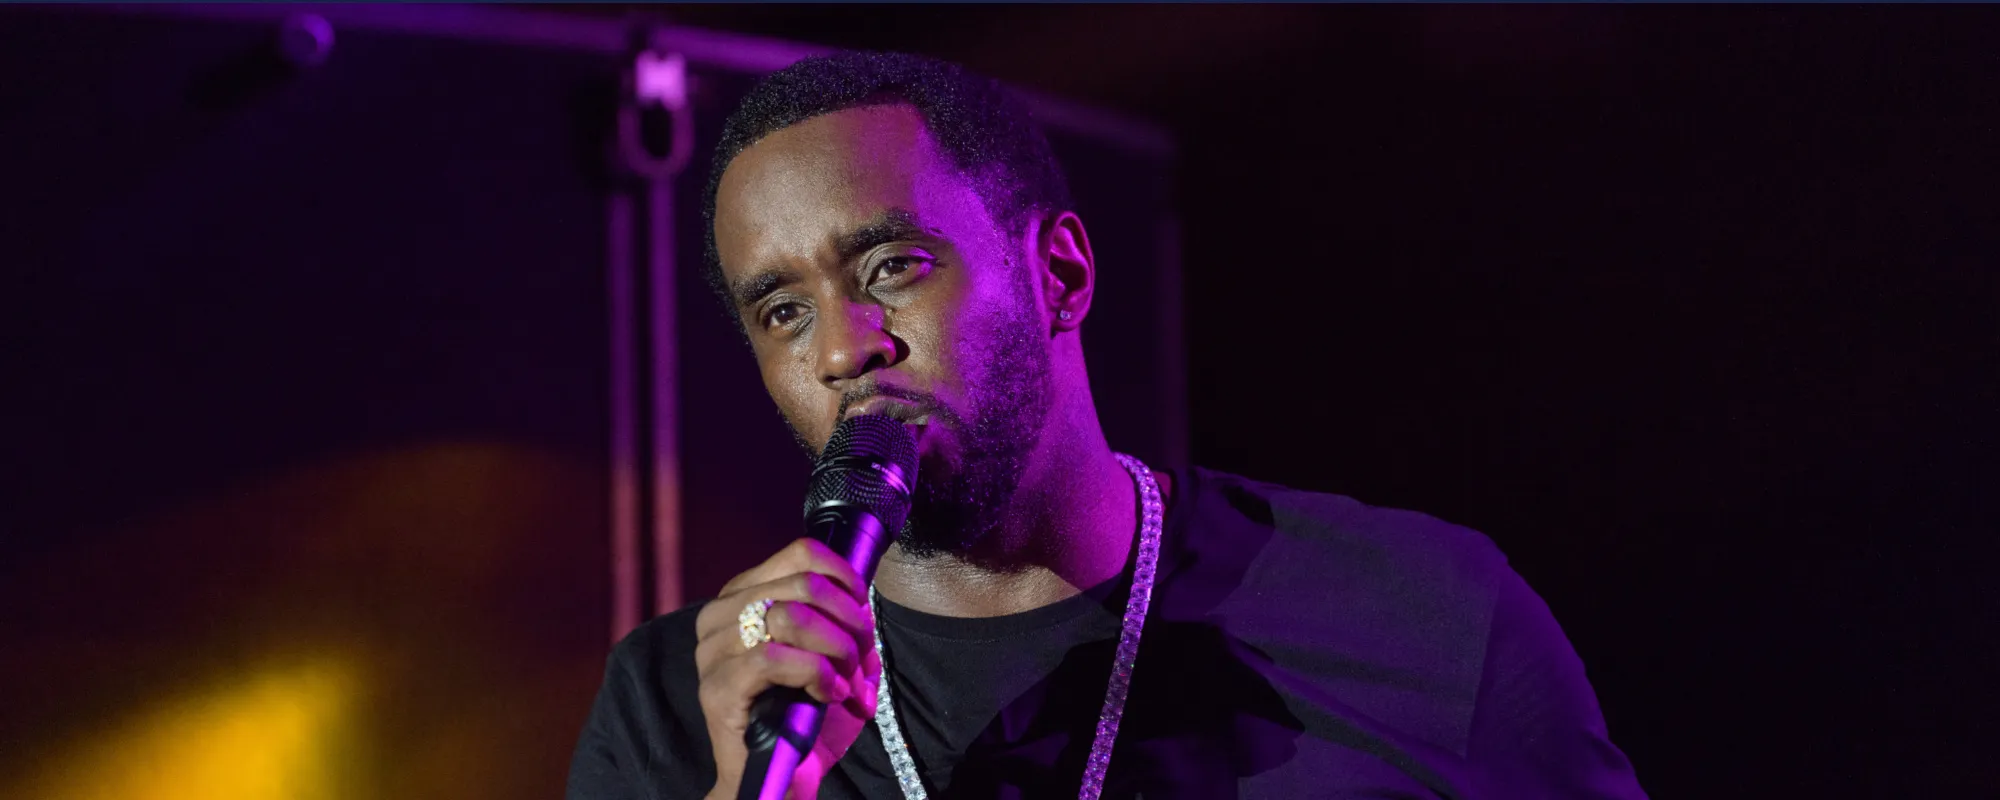 Top 10 Songs by P. Diddy